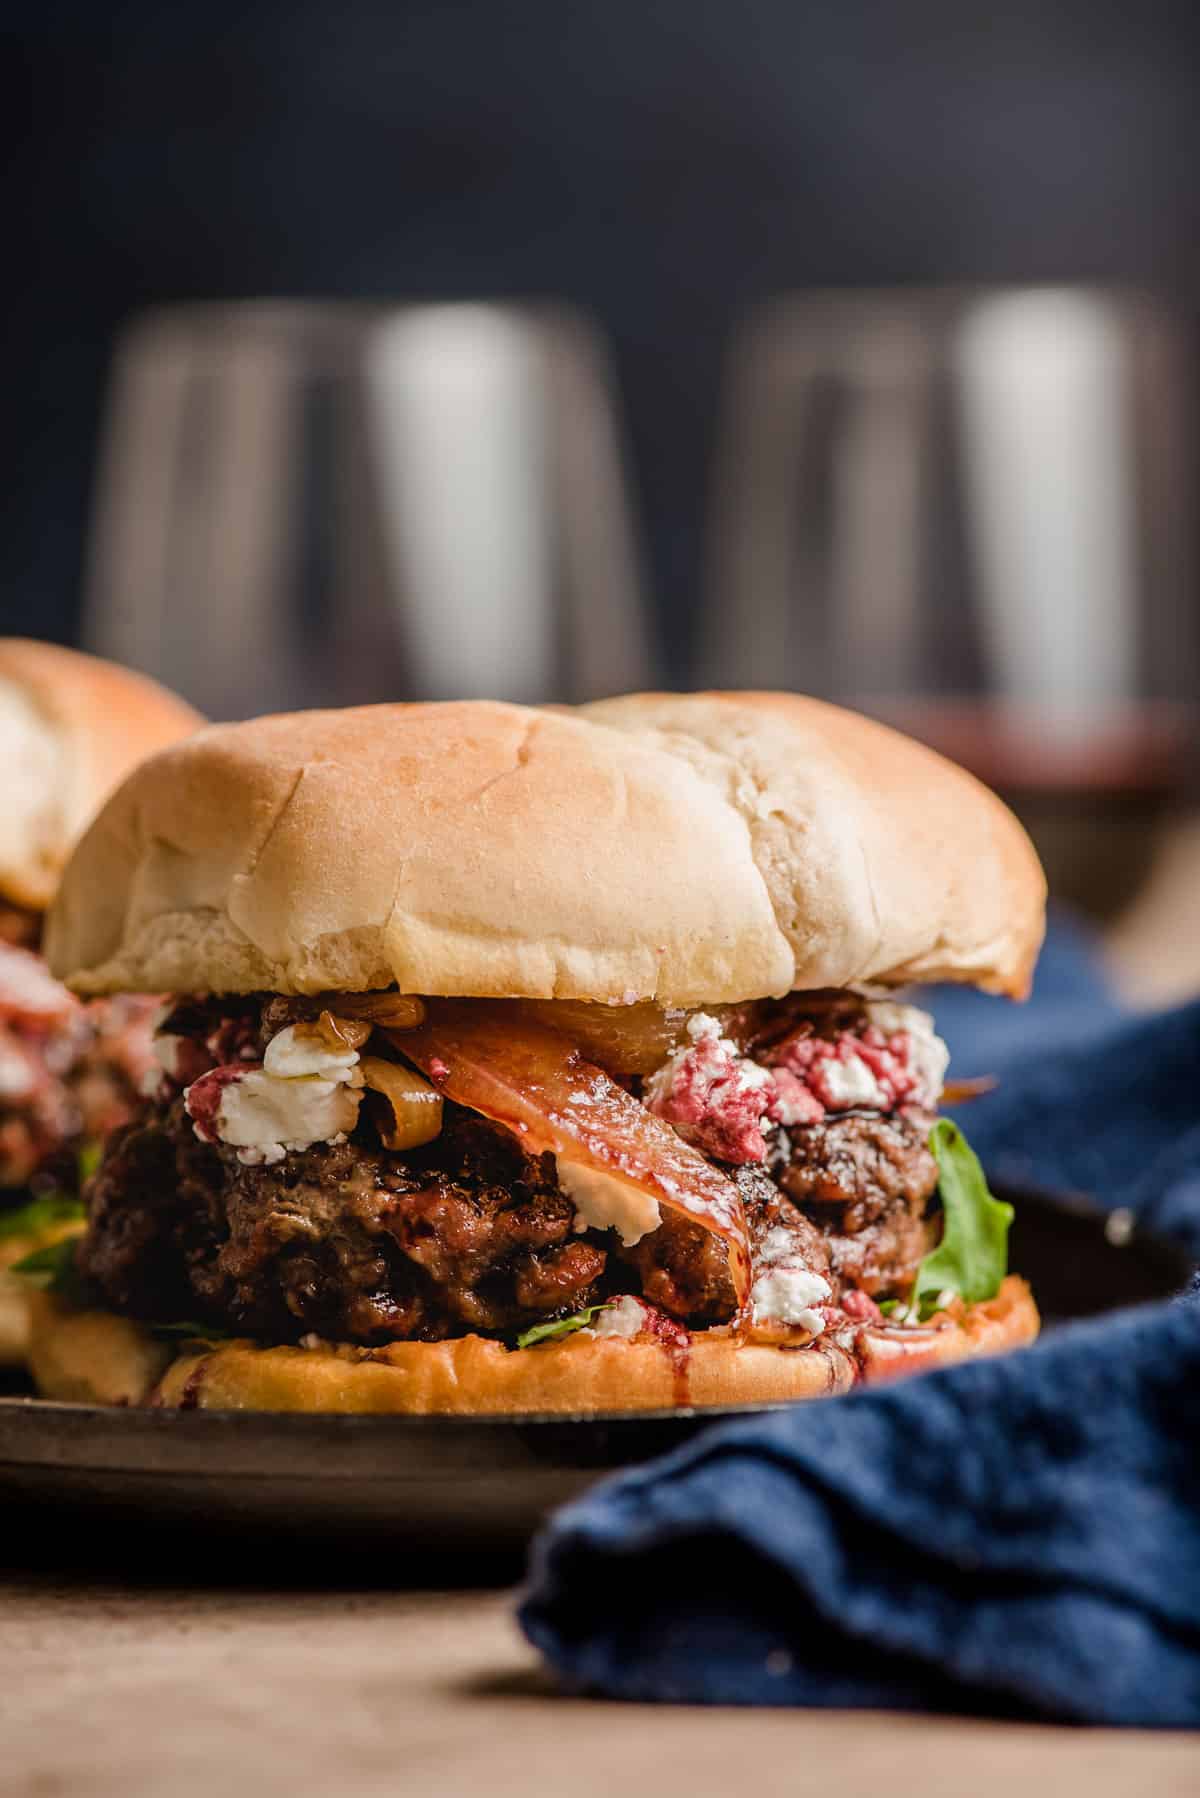 Goat cheese burger on a plate with red wine glasses in the background.